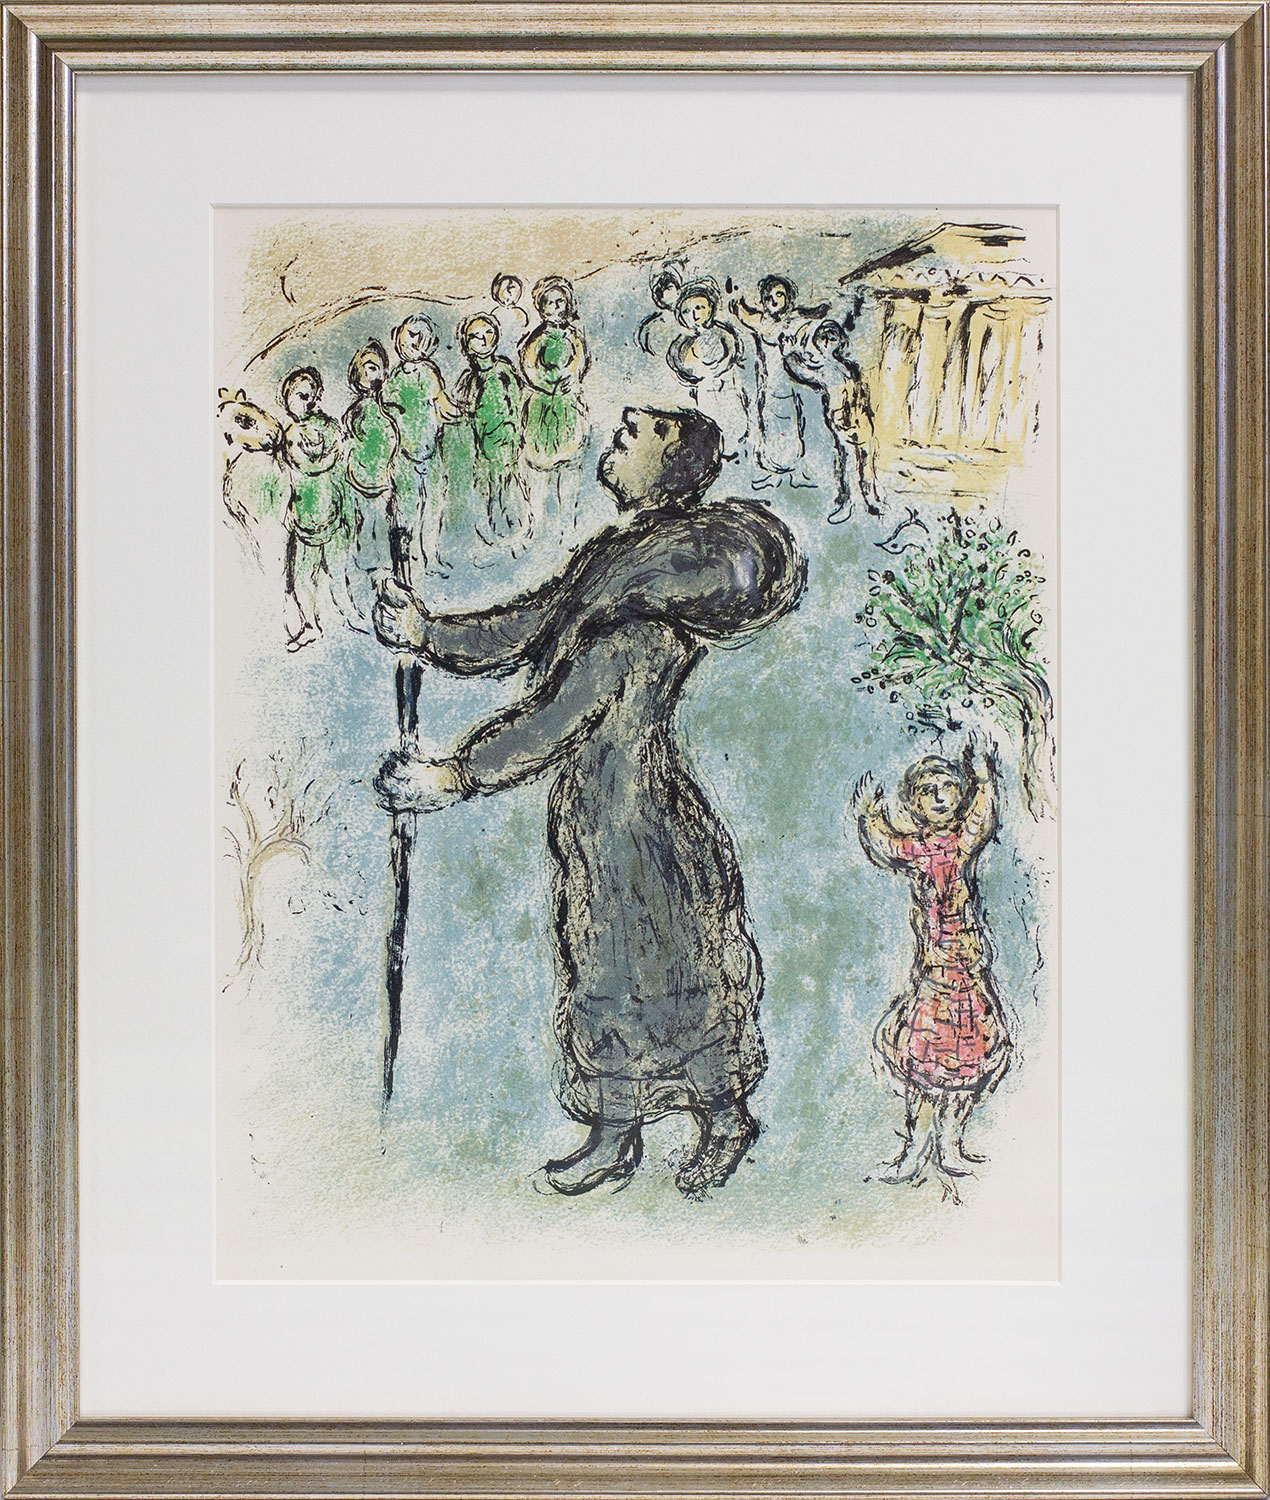 Picture "The Odyssey - Odysseus Disguised as a Beggar" (1989), framed by Marc Chagall